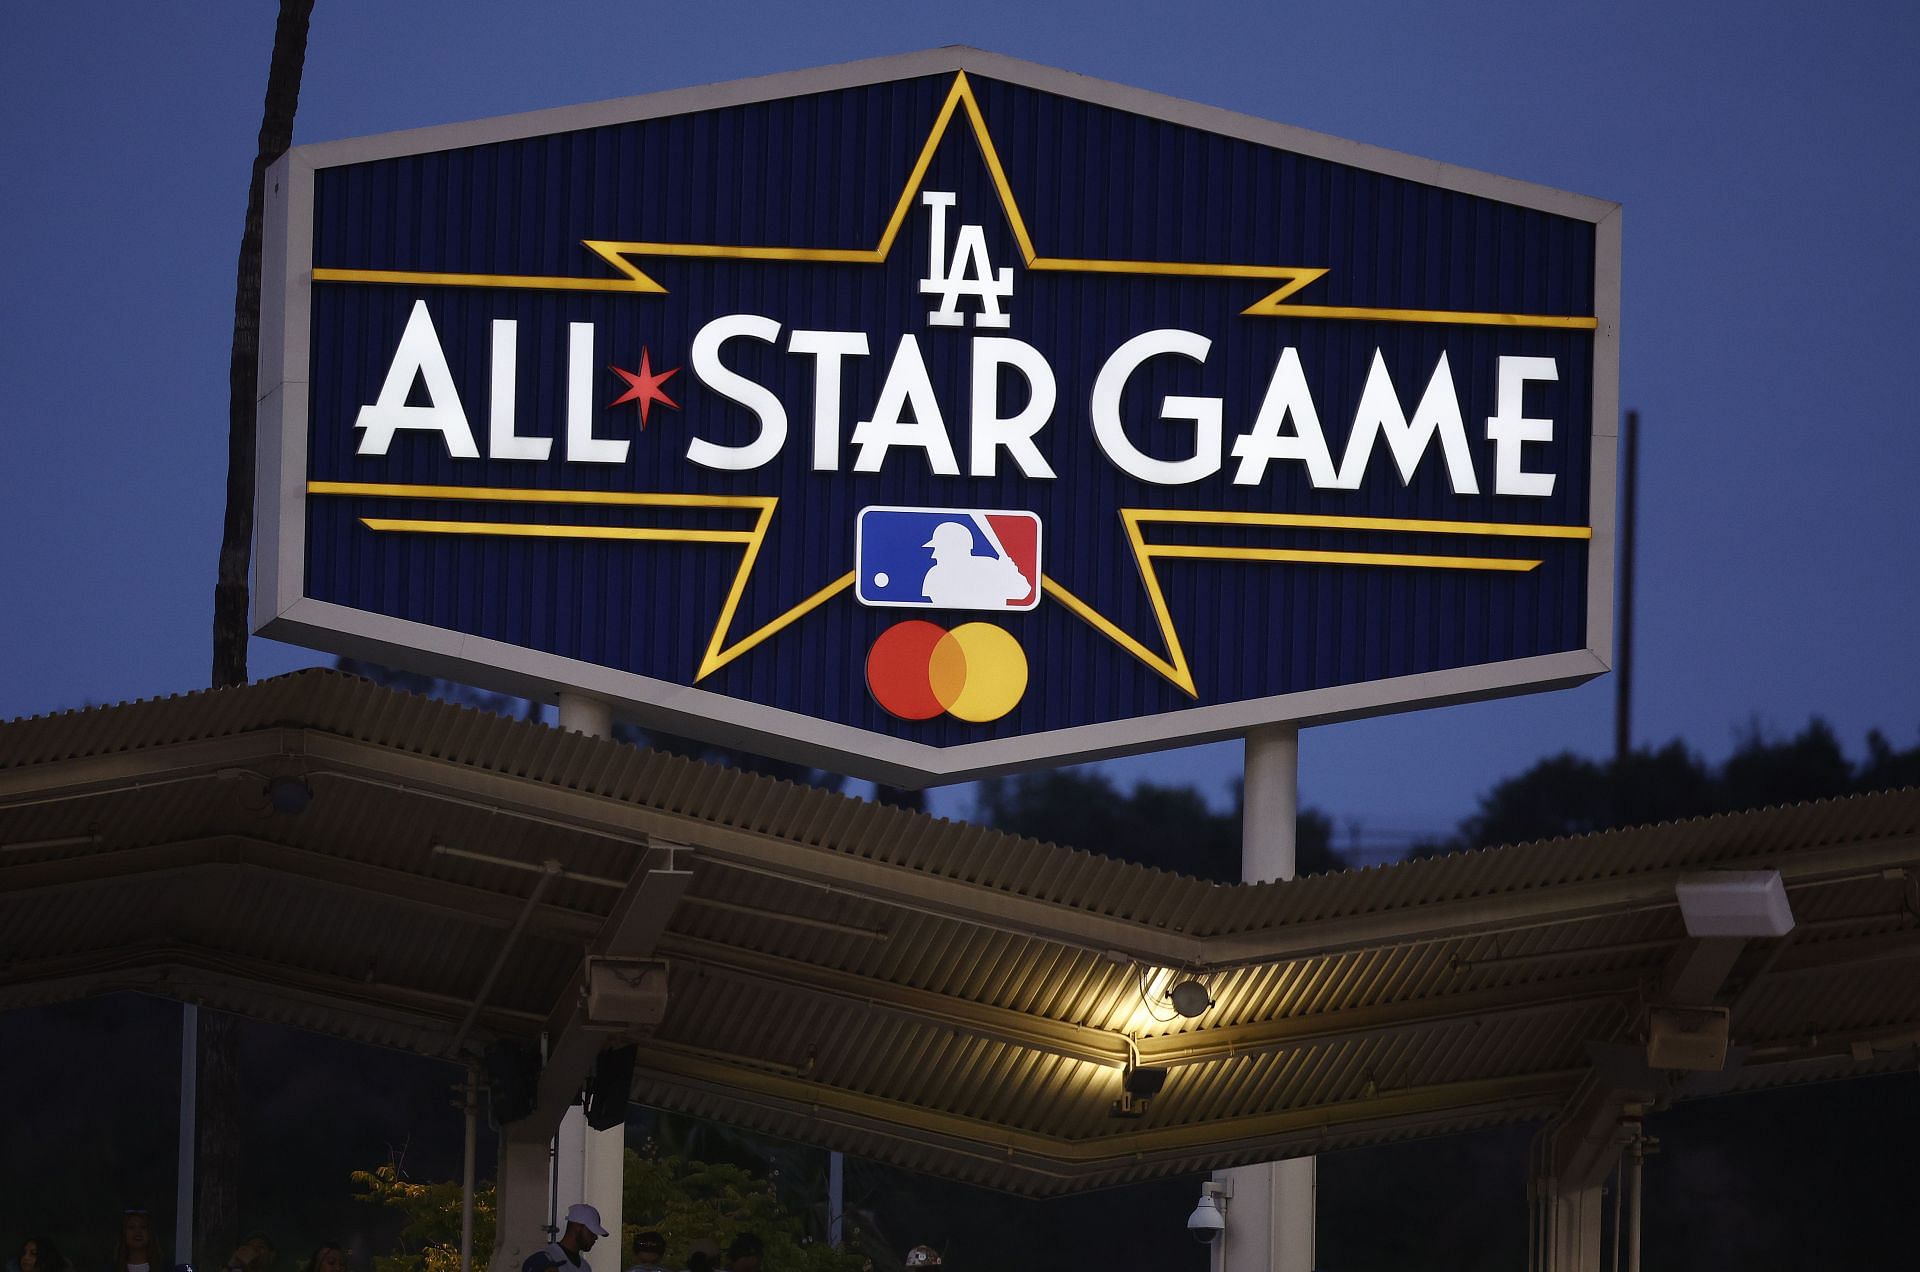 The All-Star Game will be played at Dodger Stadium this year.